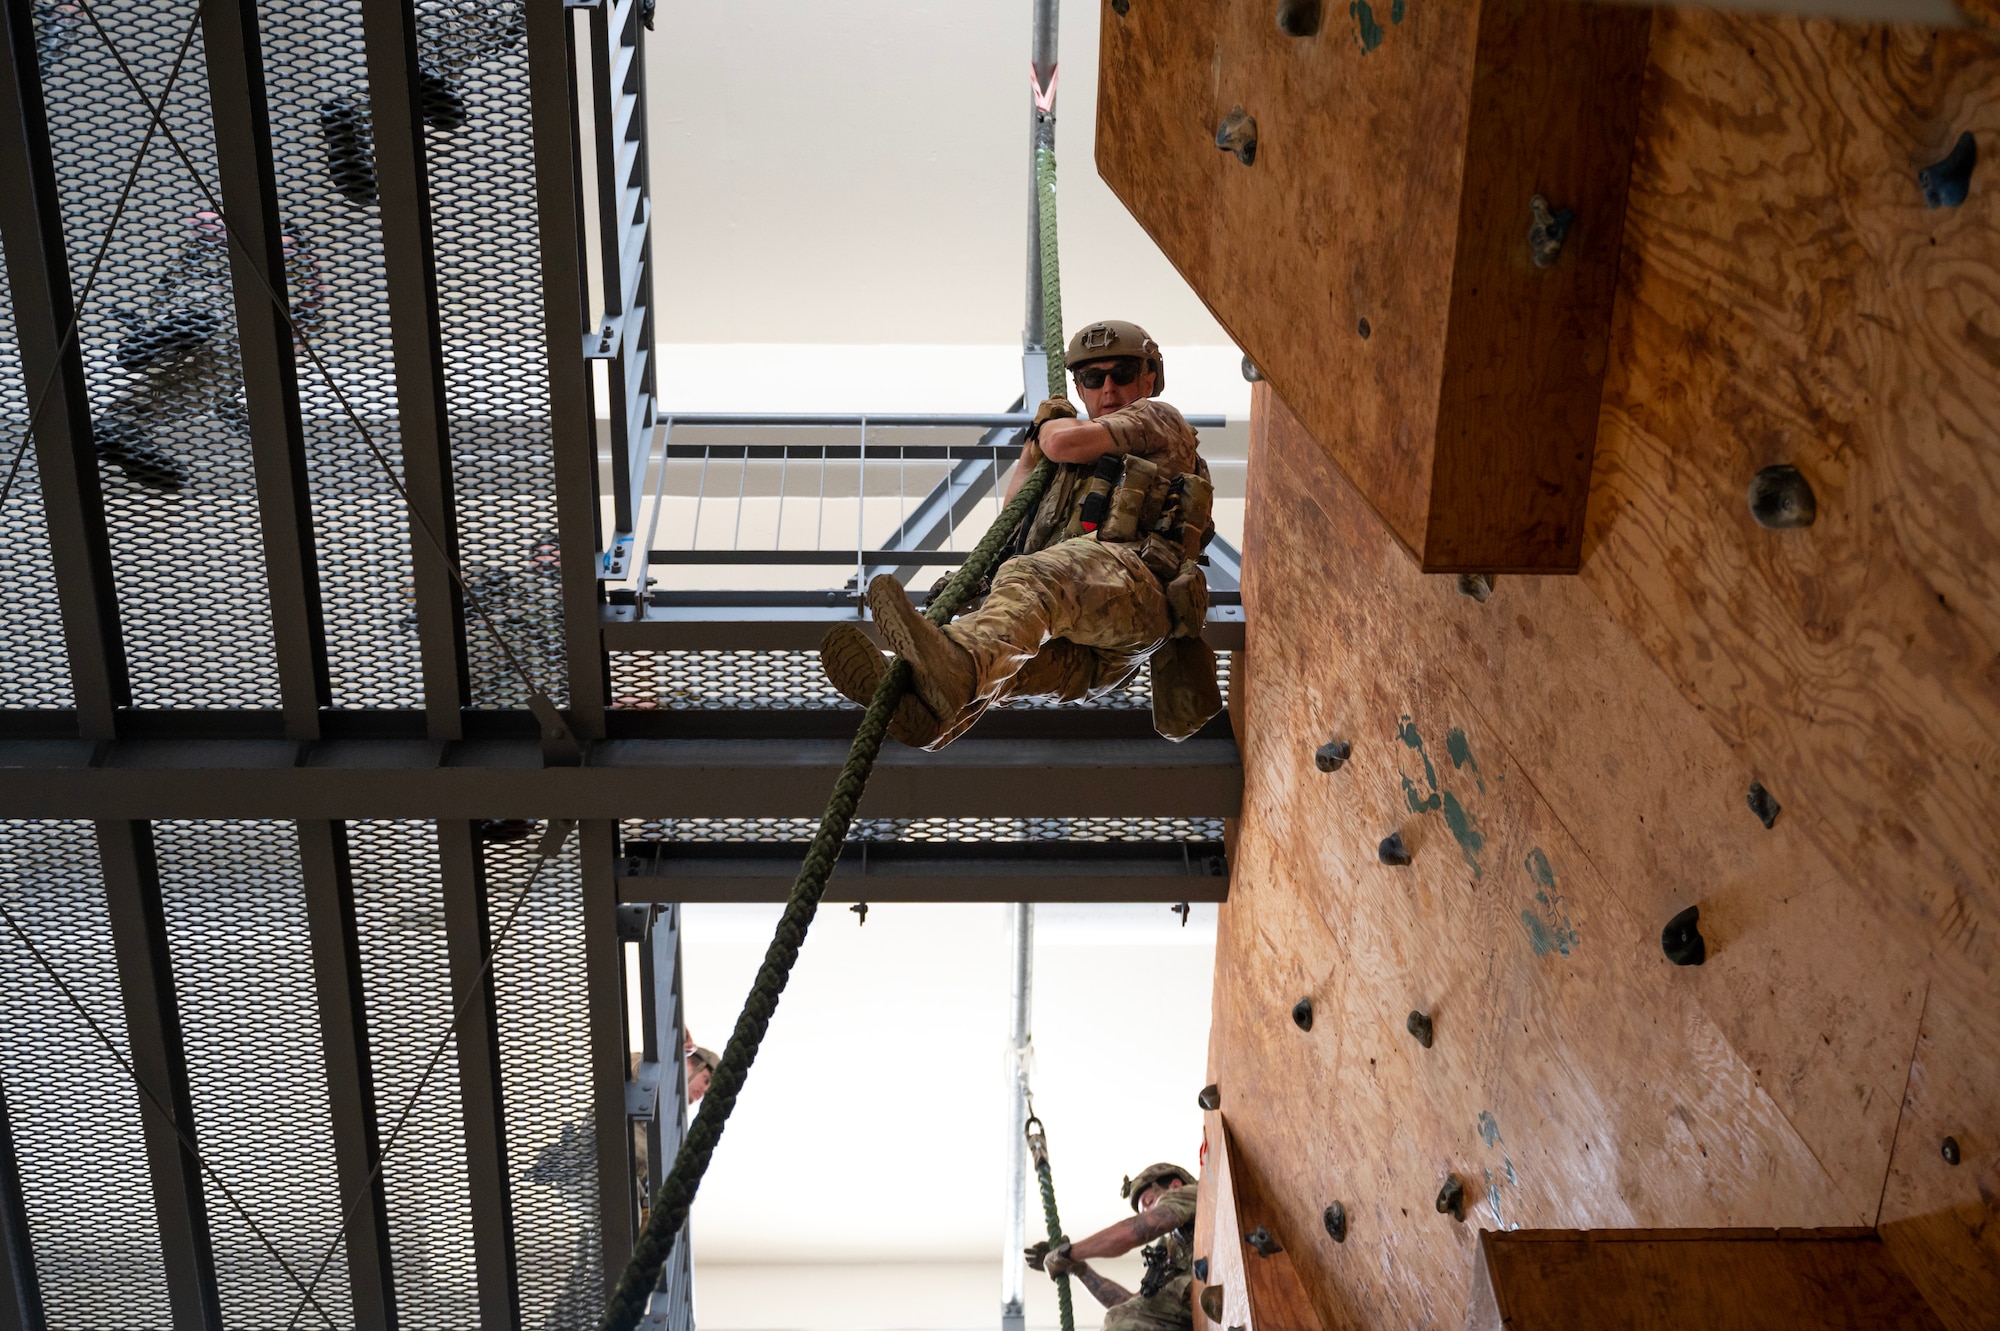 U.S. Air Force special tactics Airmen with the 320th Special Tactics Squadron perform fast rope insertions during a Monster Mash challenge at Kadena Air Base, Japan, May 5, 2023. These training events, consisting of various physically and mentally demanding tasks, are routinely conducted among special tactics units to ensure operational readiness and enhance resiliency among the operators. (U.S. Air Force photo by Staff Sgt. Jessi Roth)